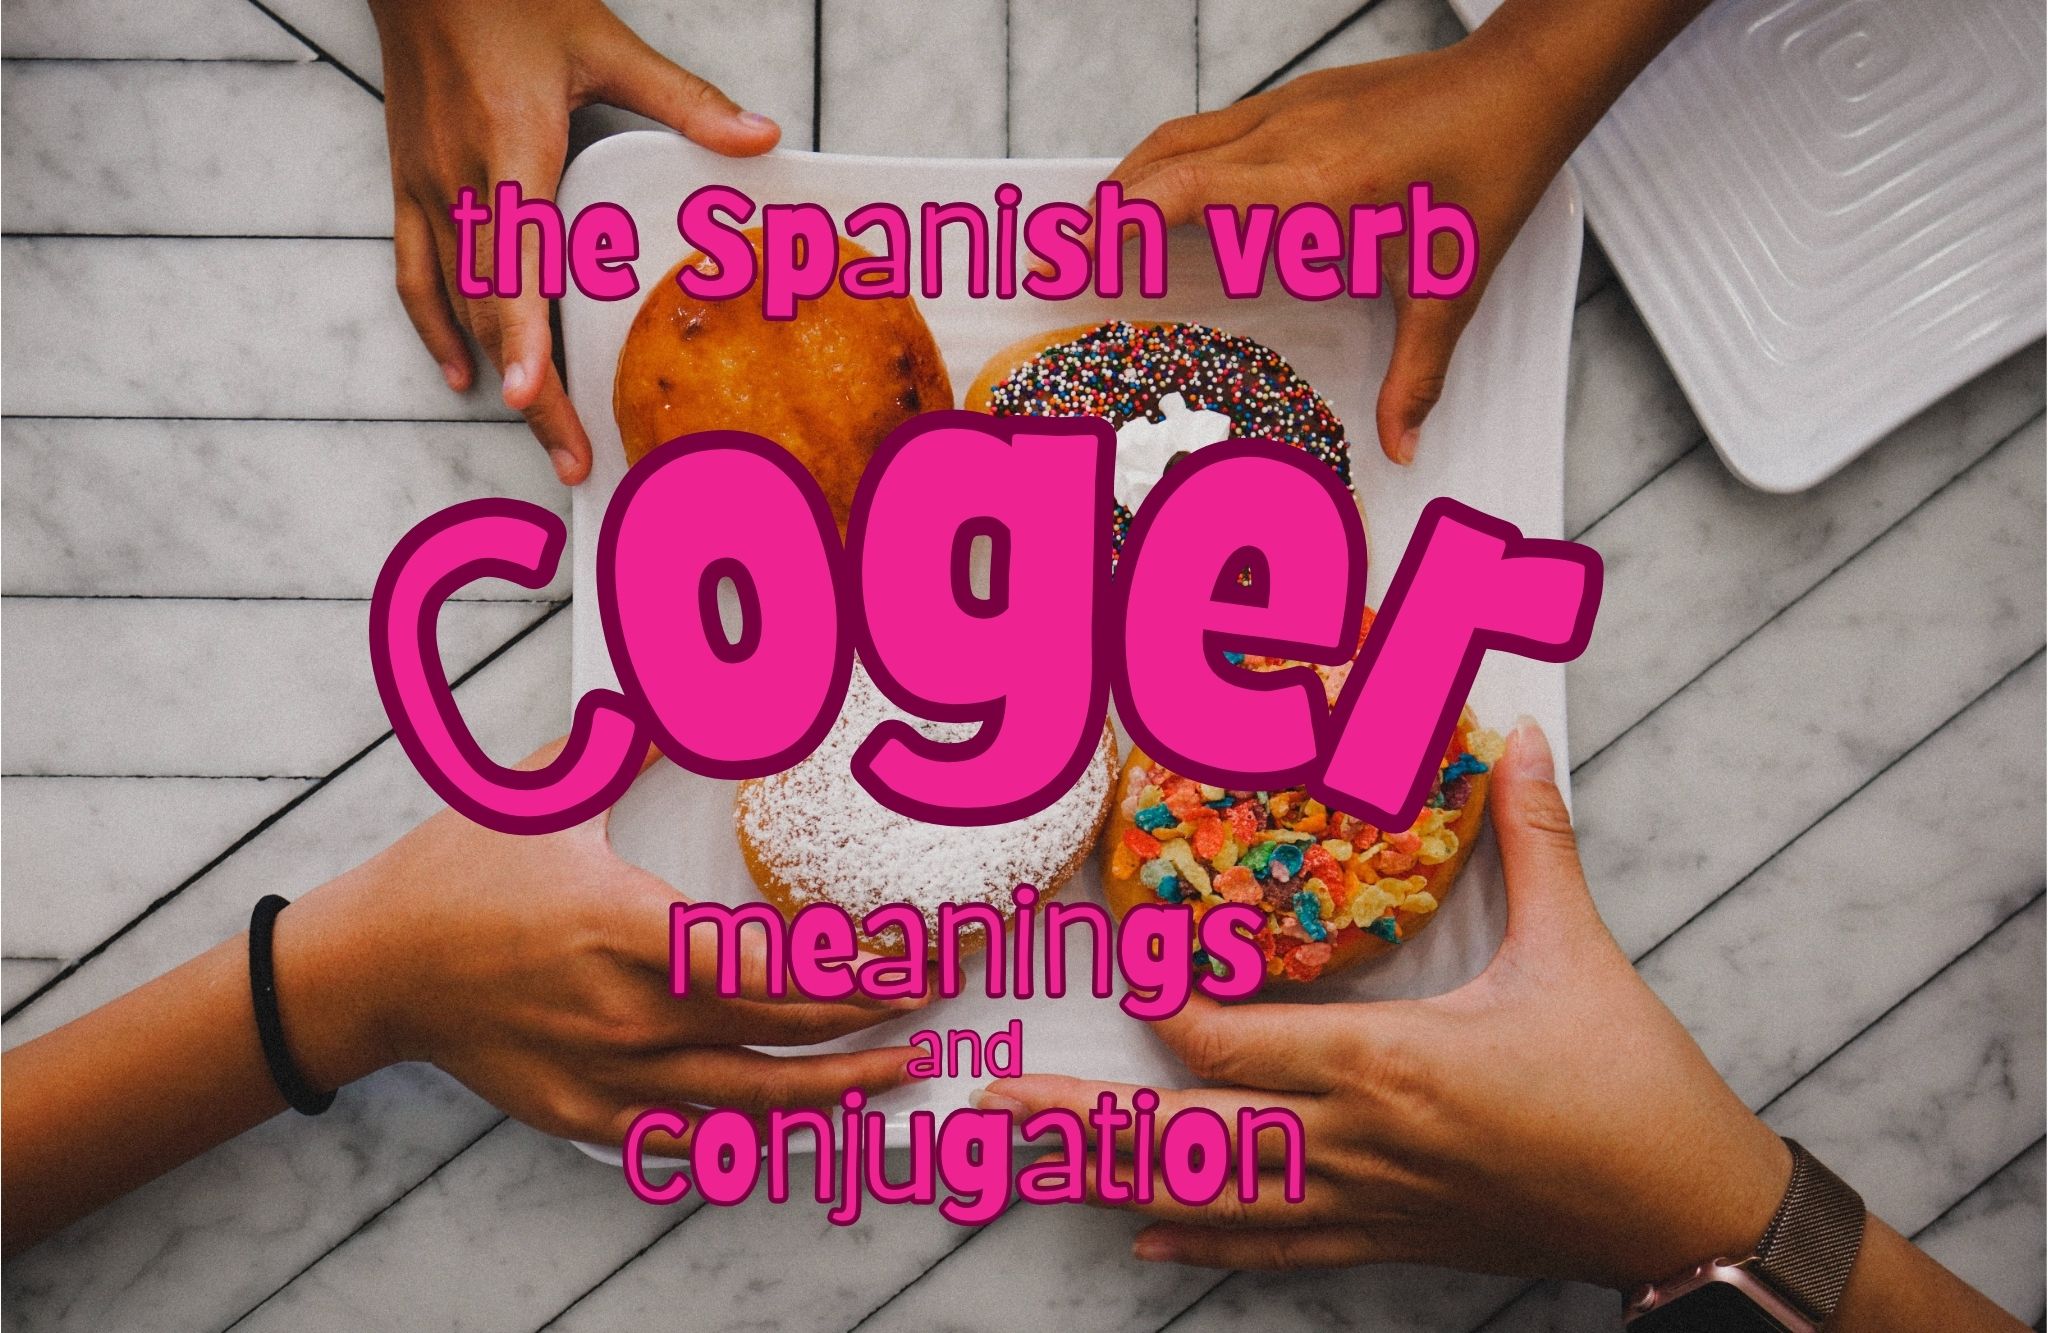 The Spanish verb Coger: Meanings and Conjugations